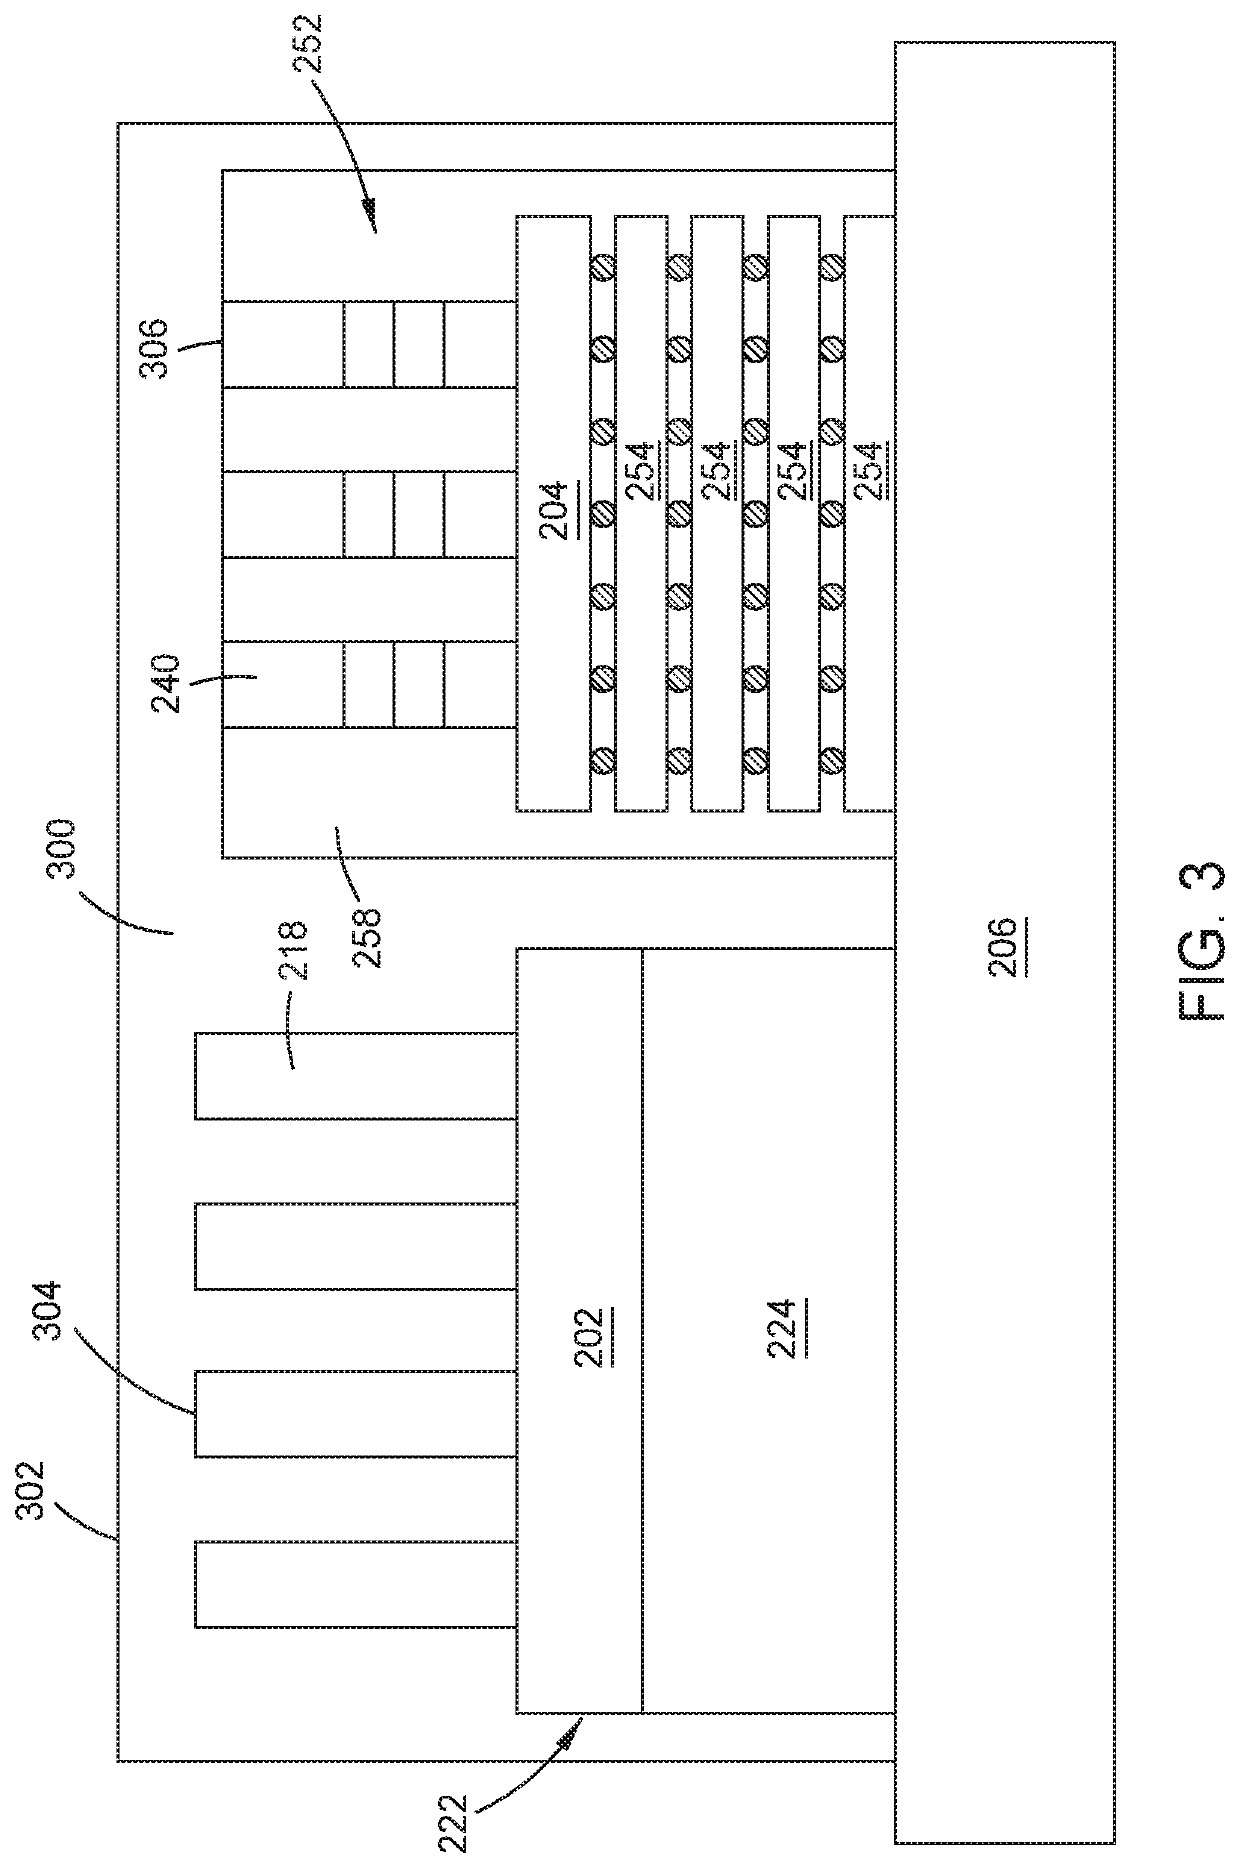 Package integration for laterally mounted IC dies with dissimilar solder interconnects